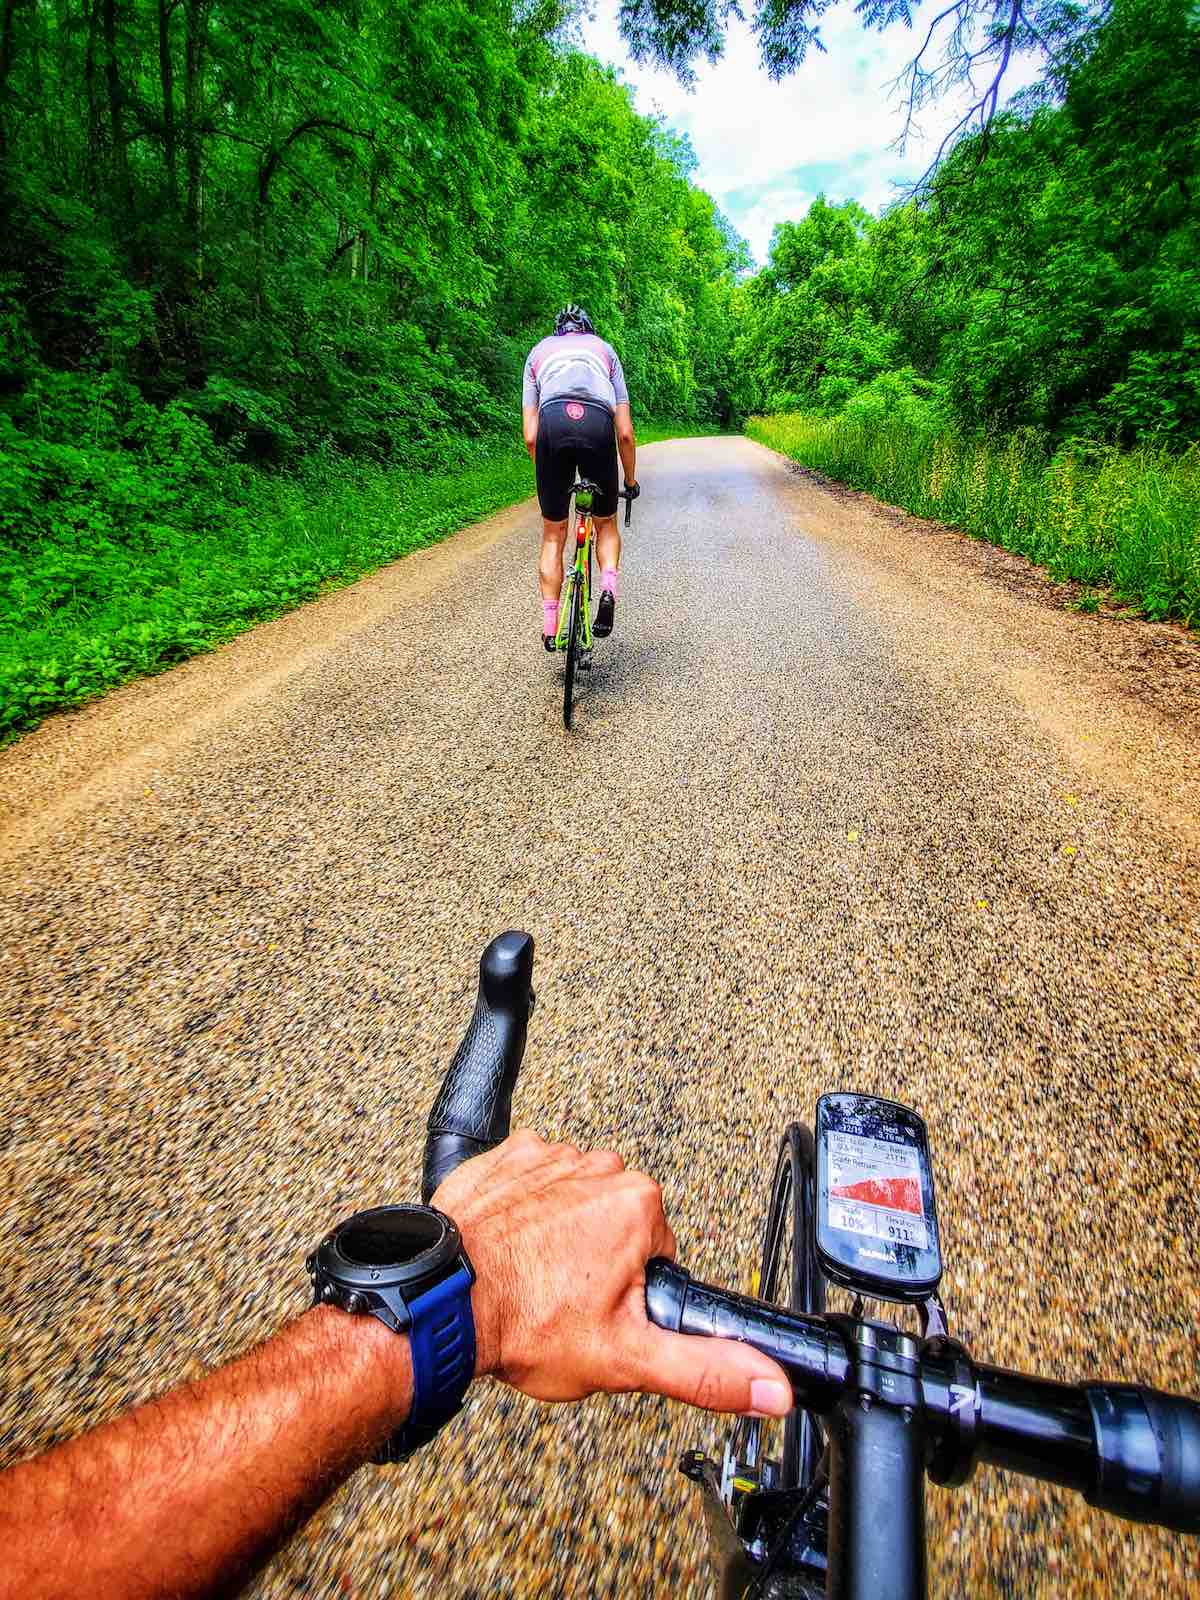 bikerumor pic of the day cycling on a gravel road in the driftless are of wisconsin.